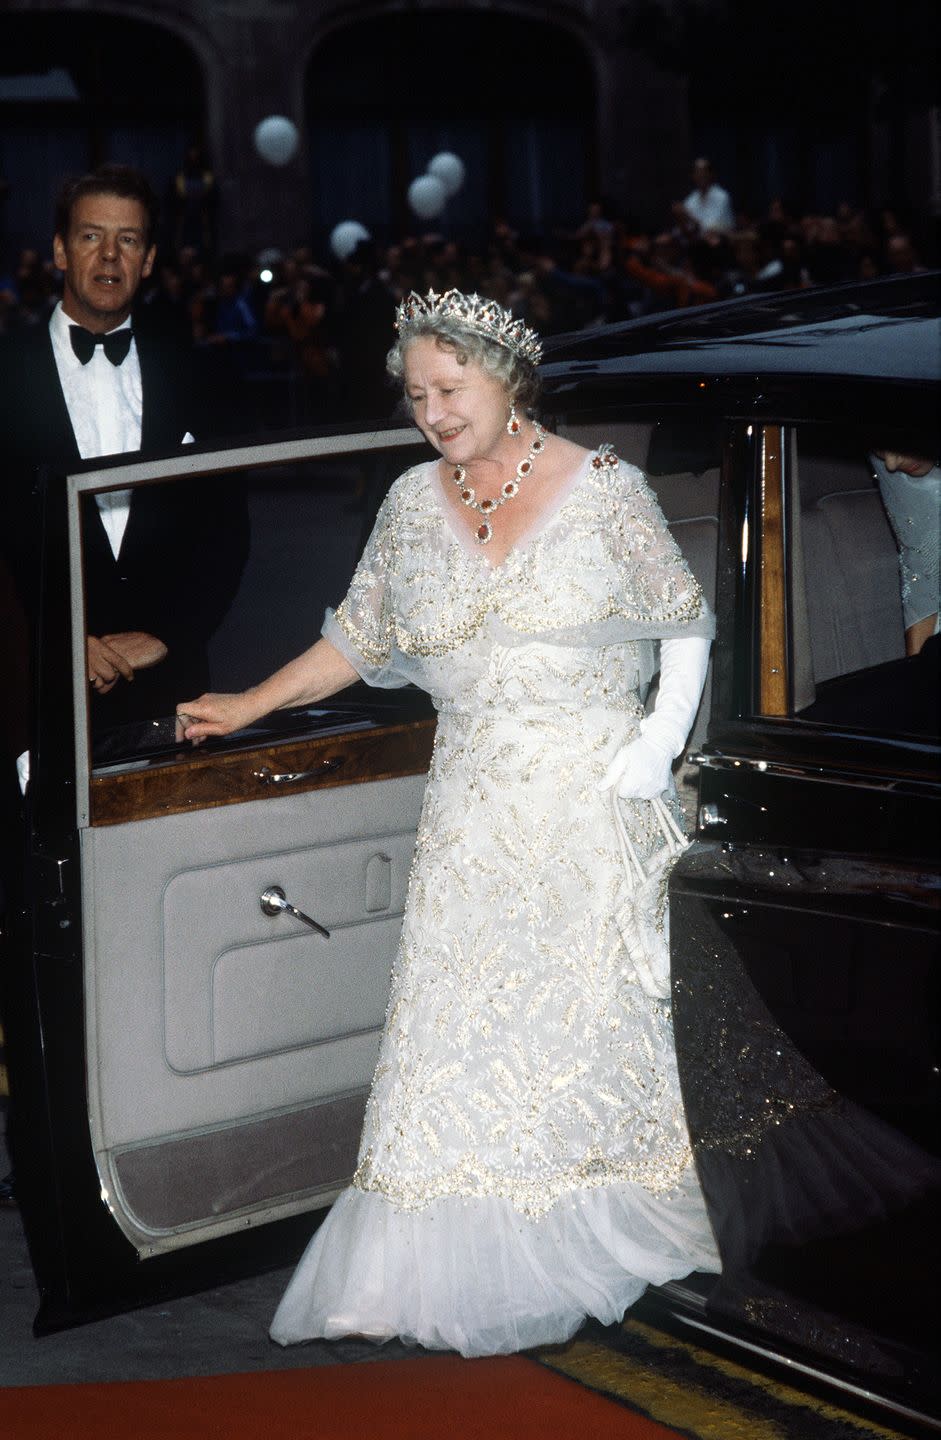 <p>Queen Elizabeth, the Queen Mother, wore a white chiffon evening gown to her 80th birthday celebration in 1980. She paired the gown with a stunning tiara and necklace set. </p>